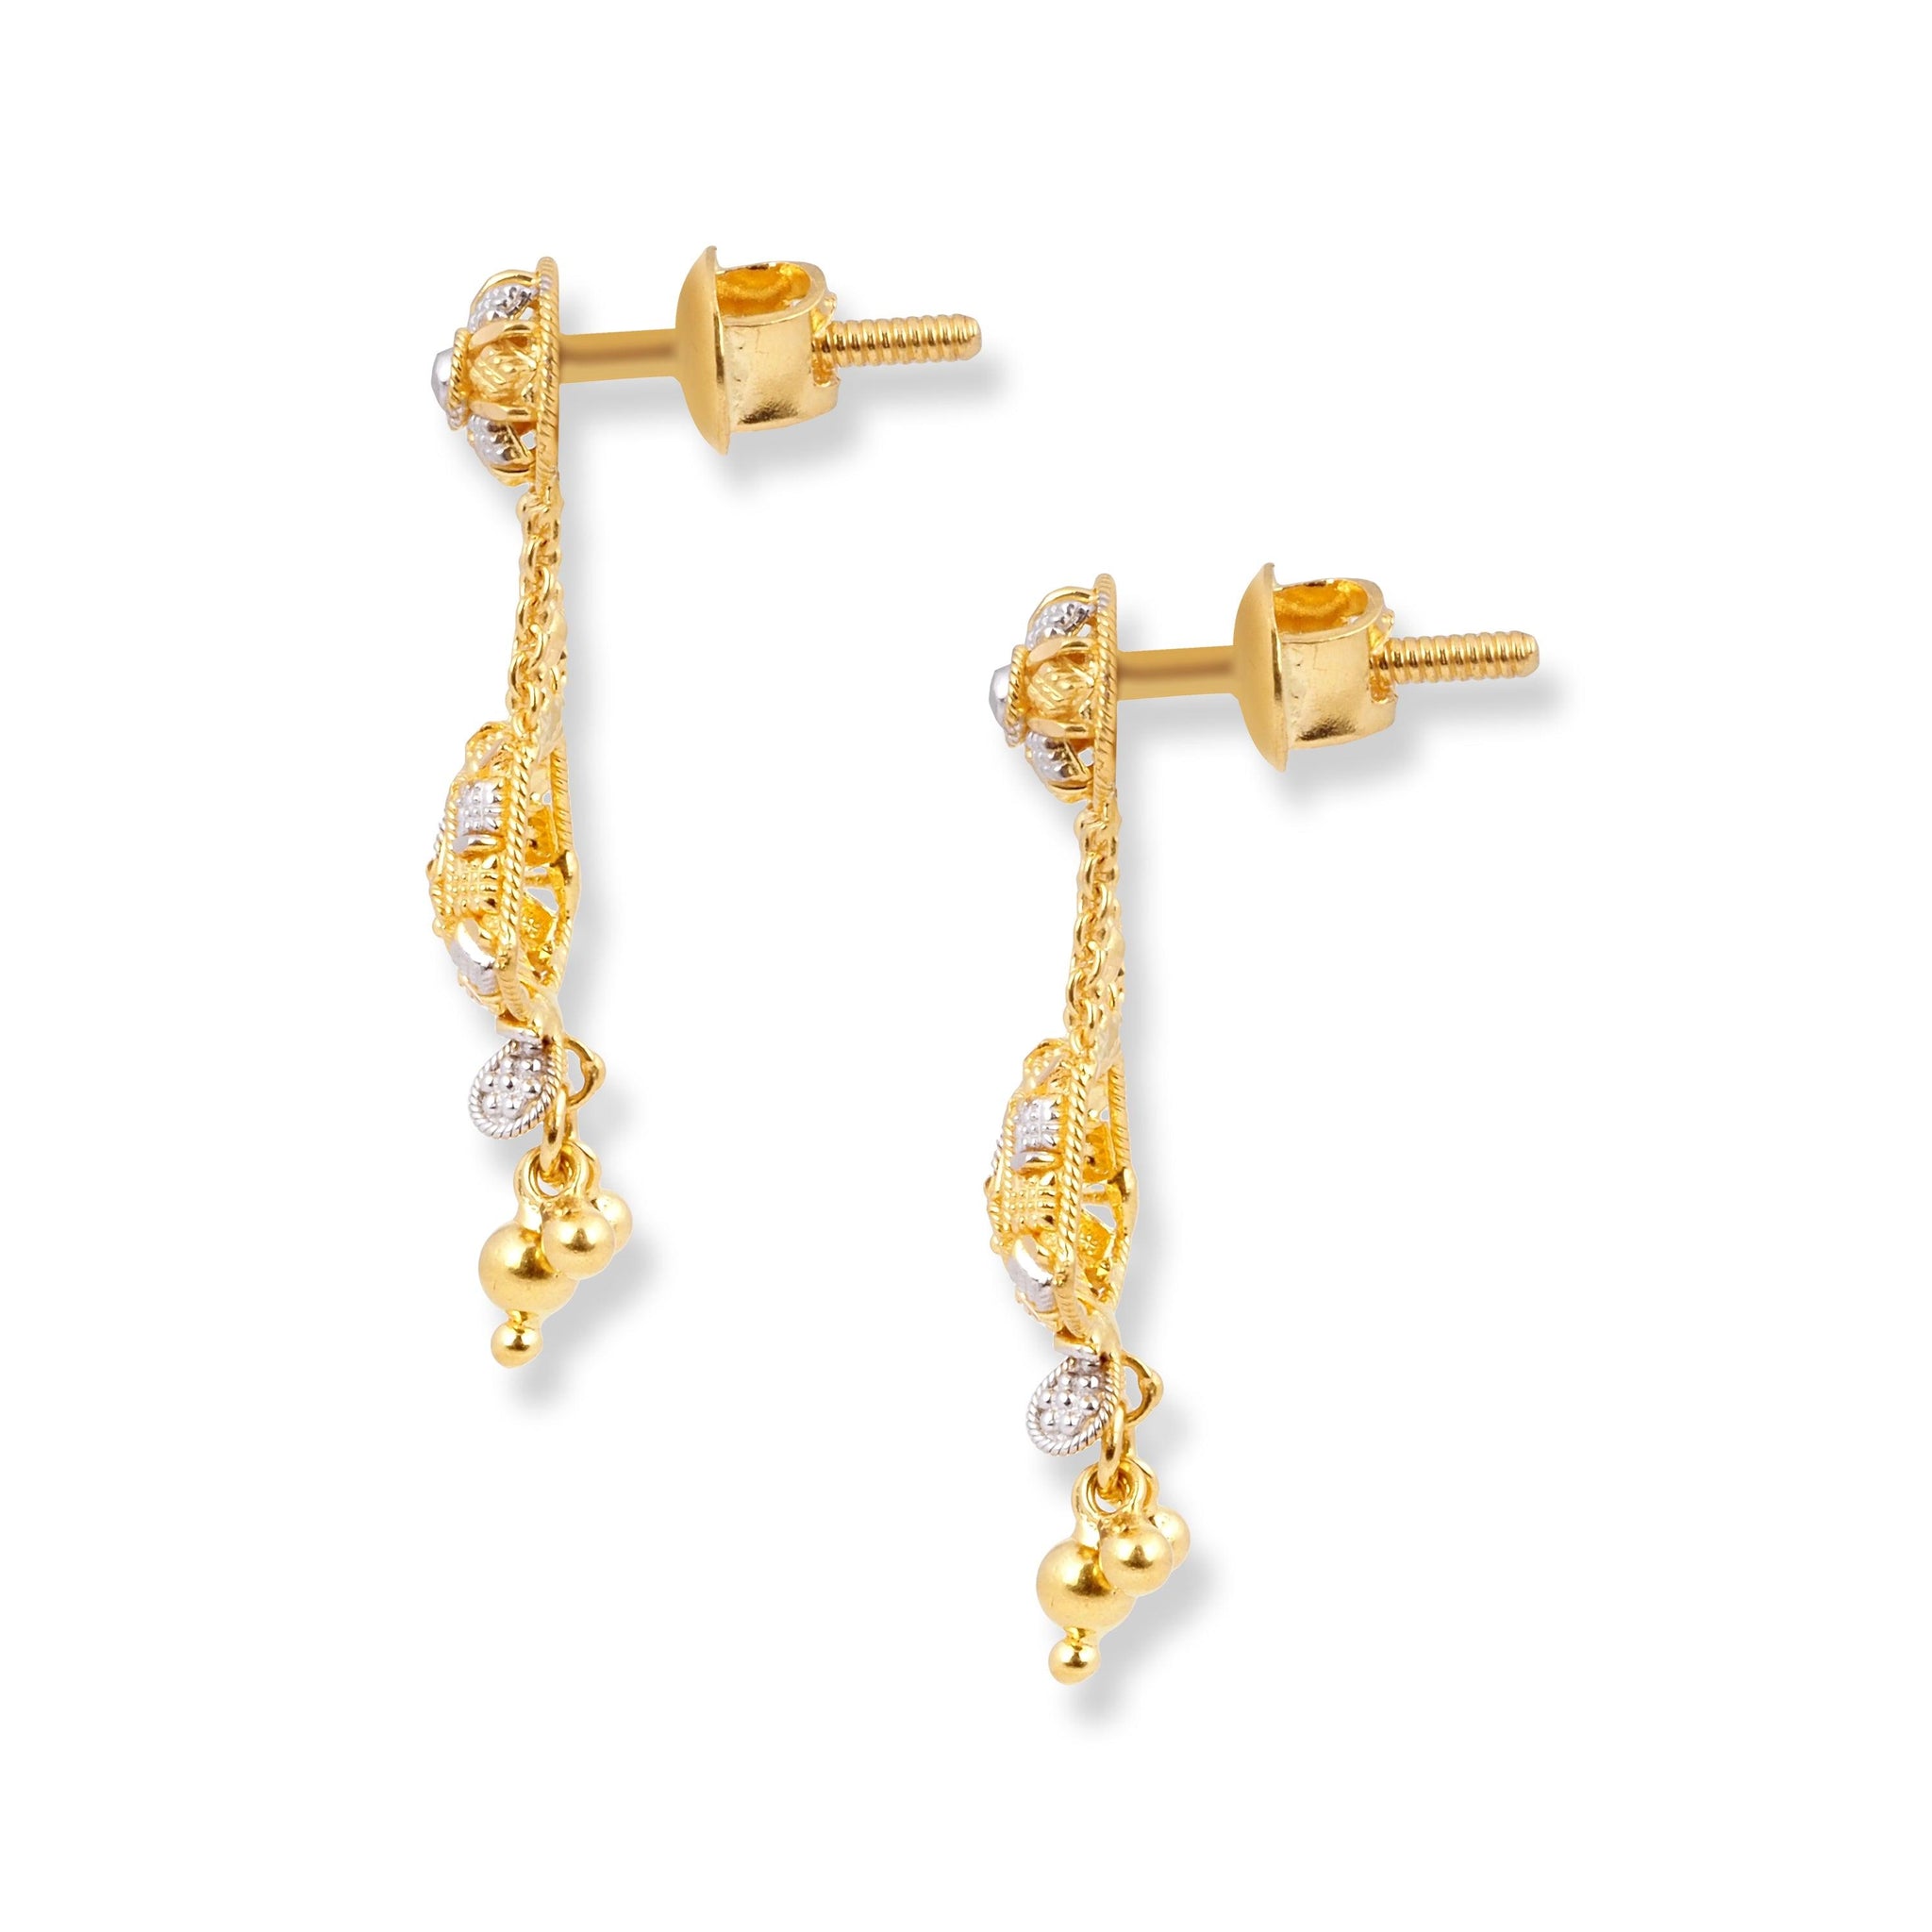 22ct Yellow Gold Necklace & Earring Set With Rhodium Plating Design